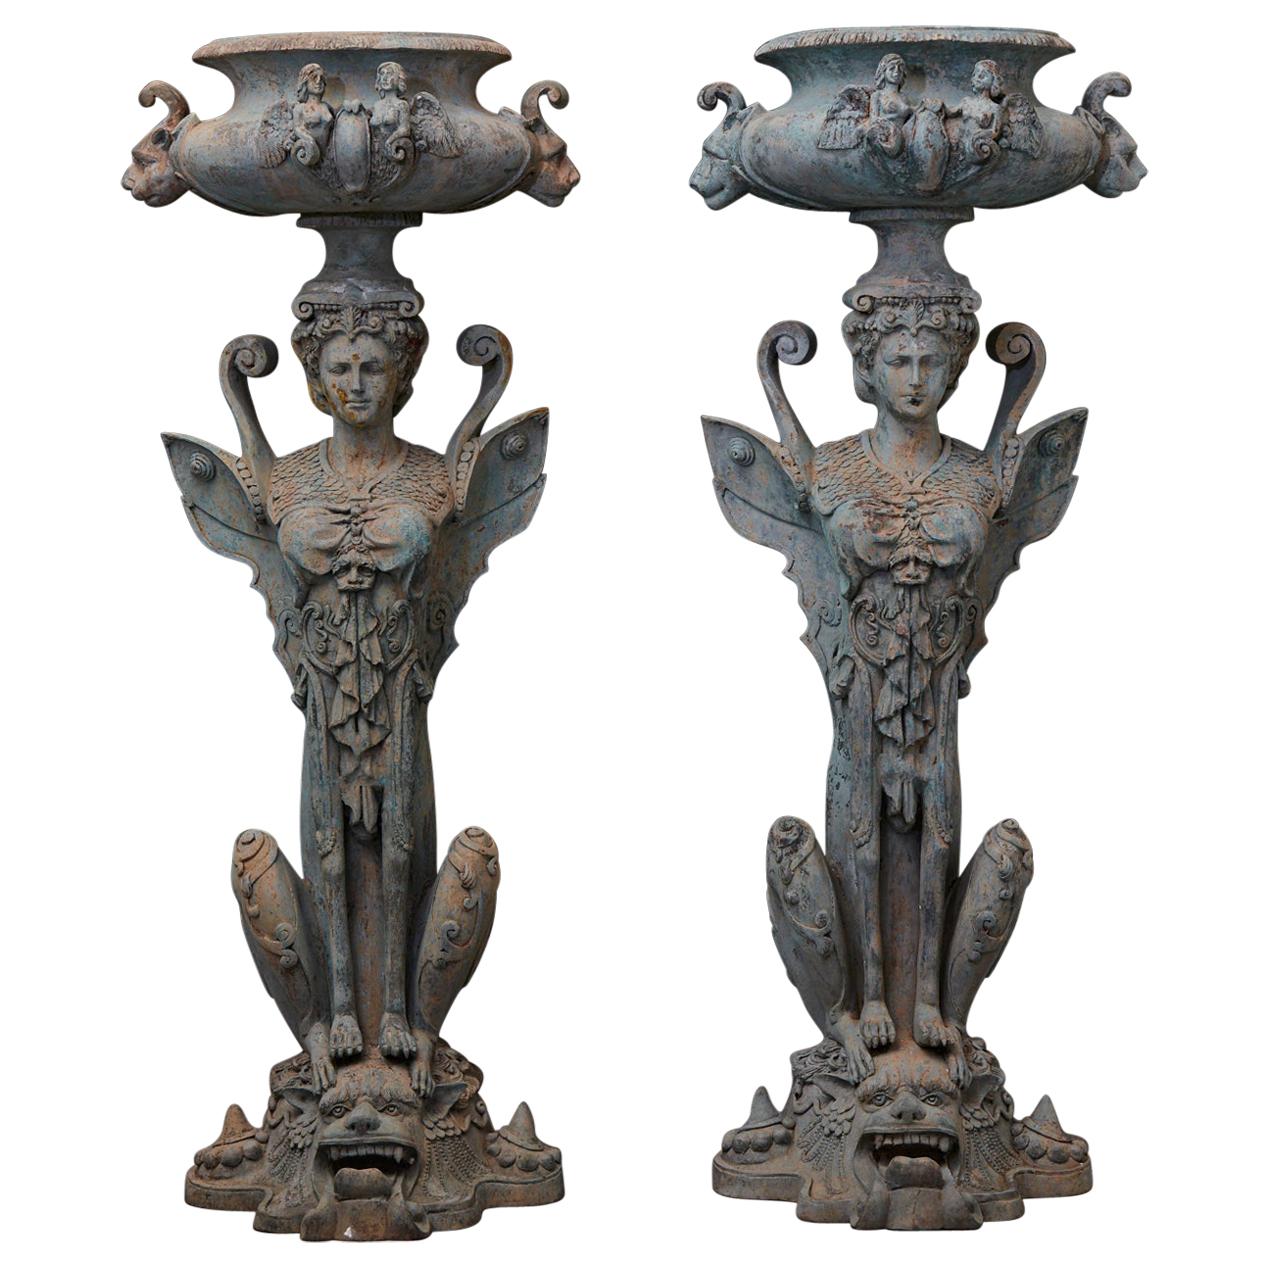 Pair of Tall Patinated Cast Iron Planters Showing Mythical Creatures / Chimeres